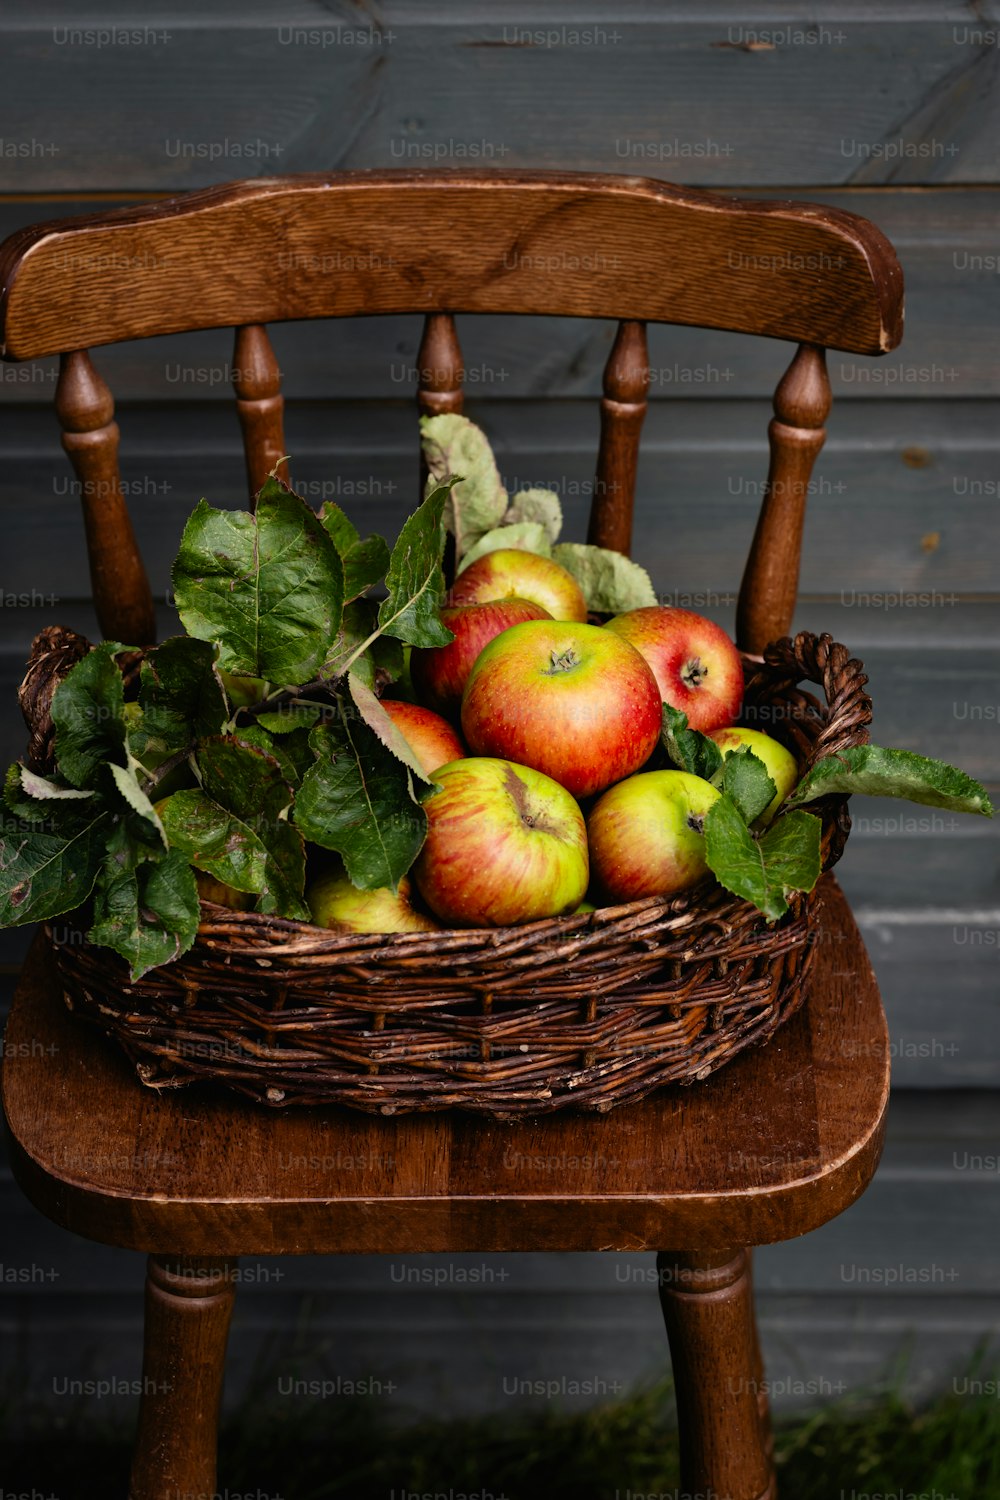 a basket full of apples sitting on a wooden chair